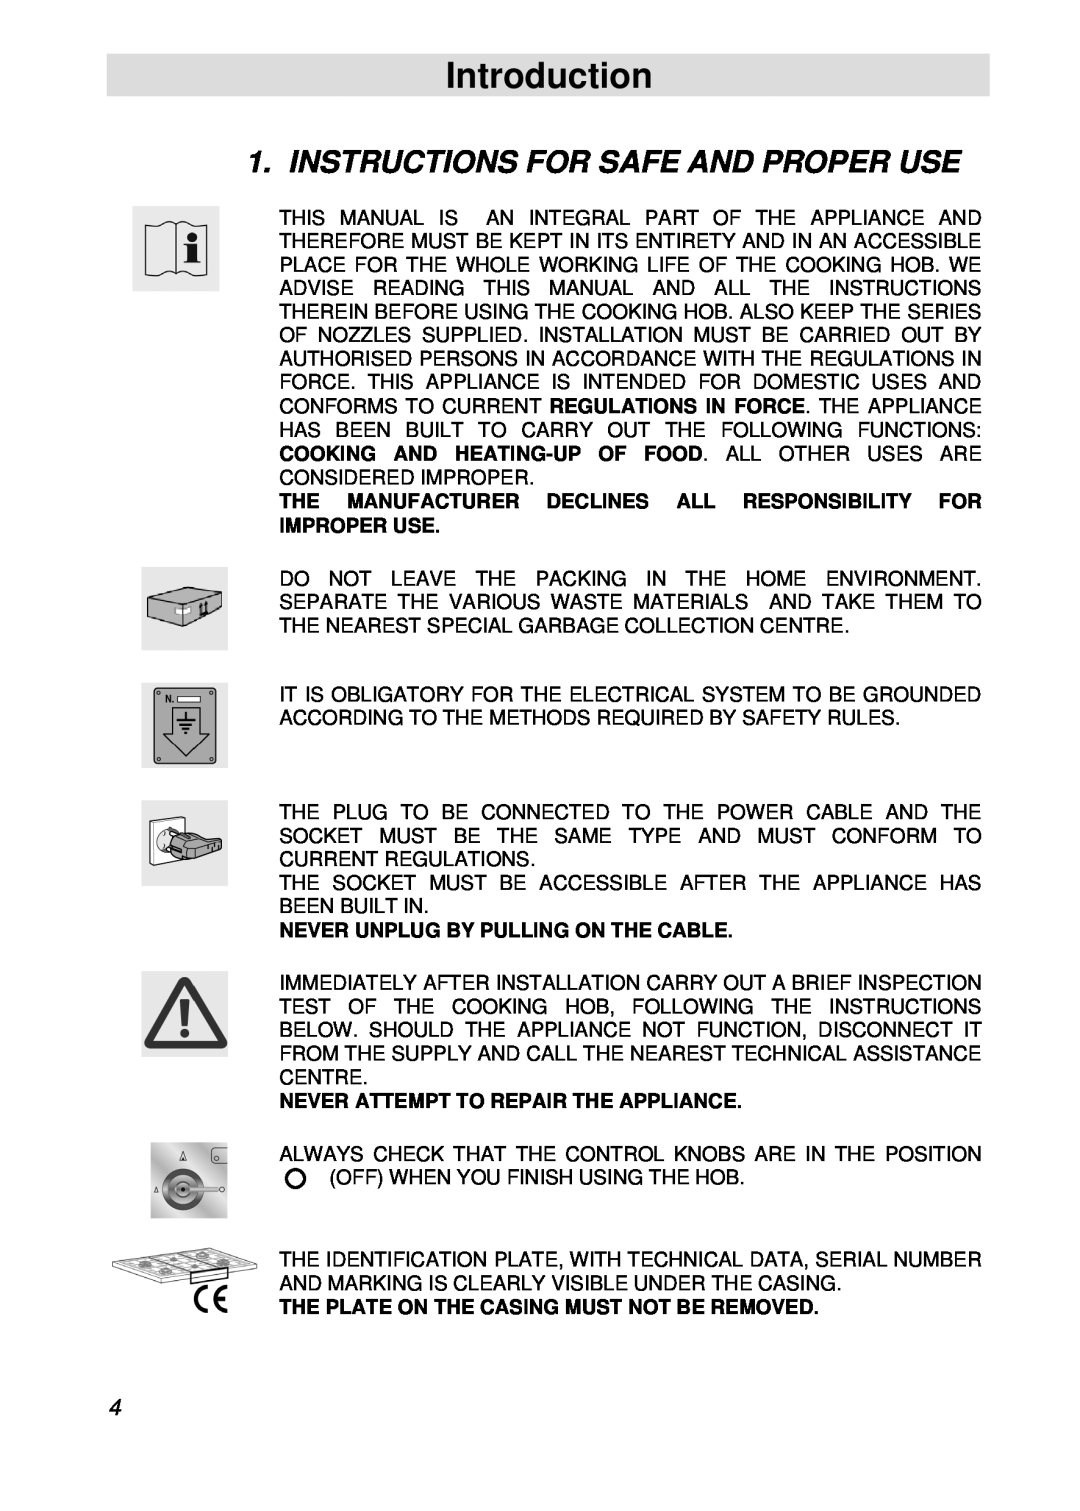 Smeg PGFA95F-1 manual Introduction, Instructions For Safe And Proper Use, Never Unplug By Pulling On The Cable 